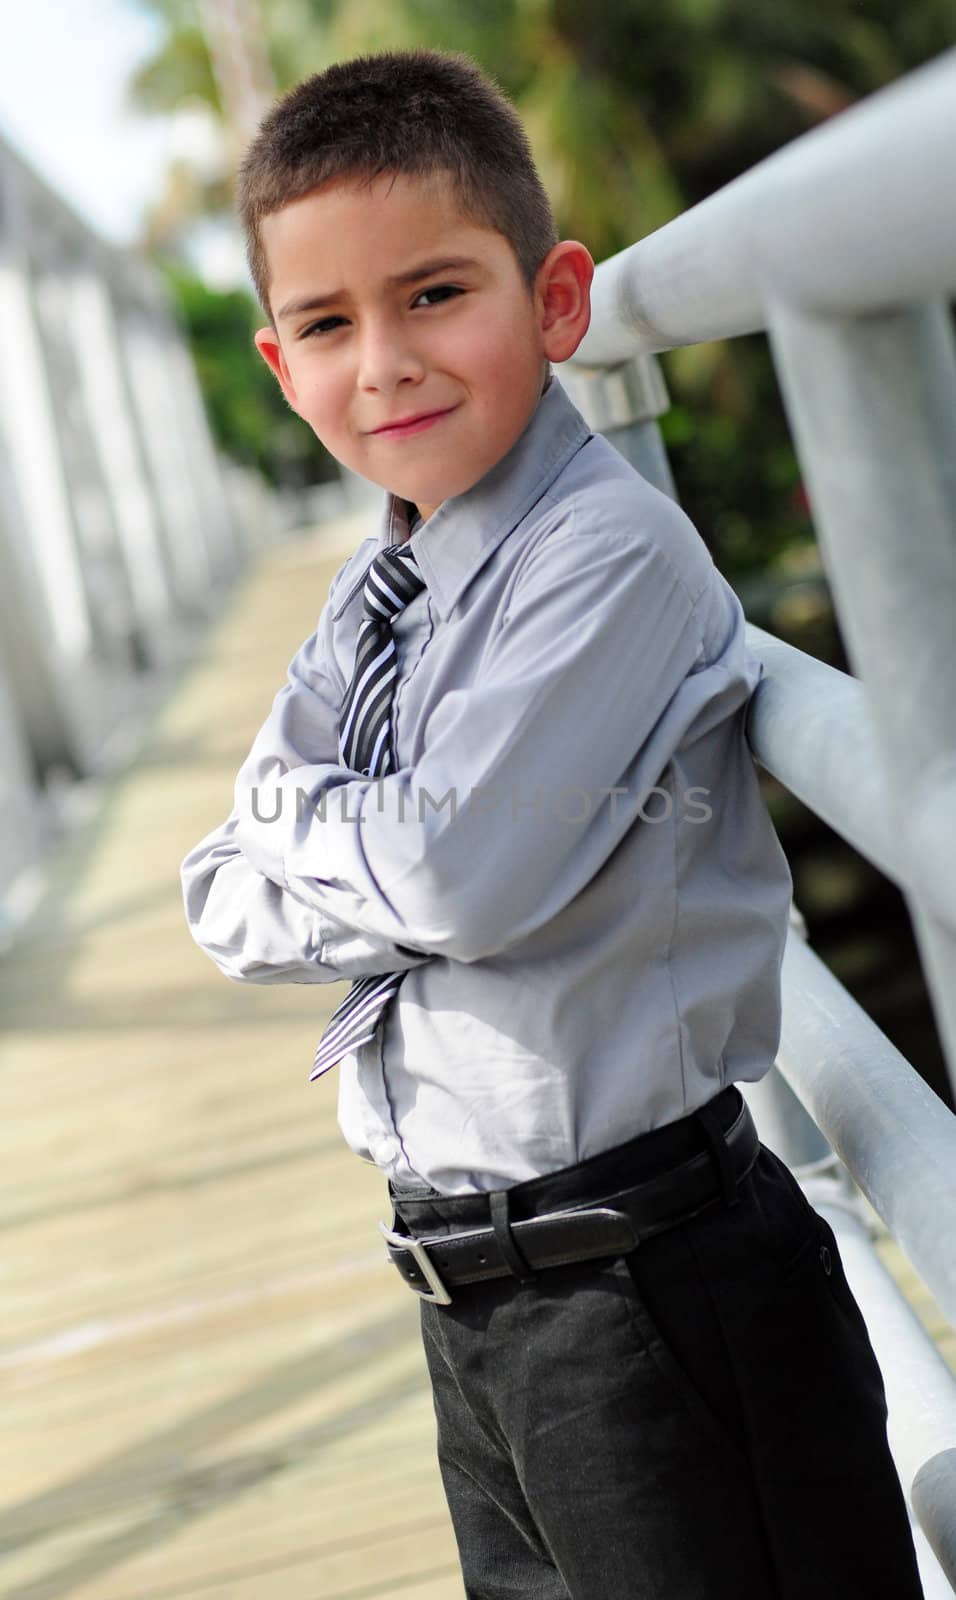 Young boy in suit with arms crossed by ftlaudgirl